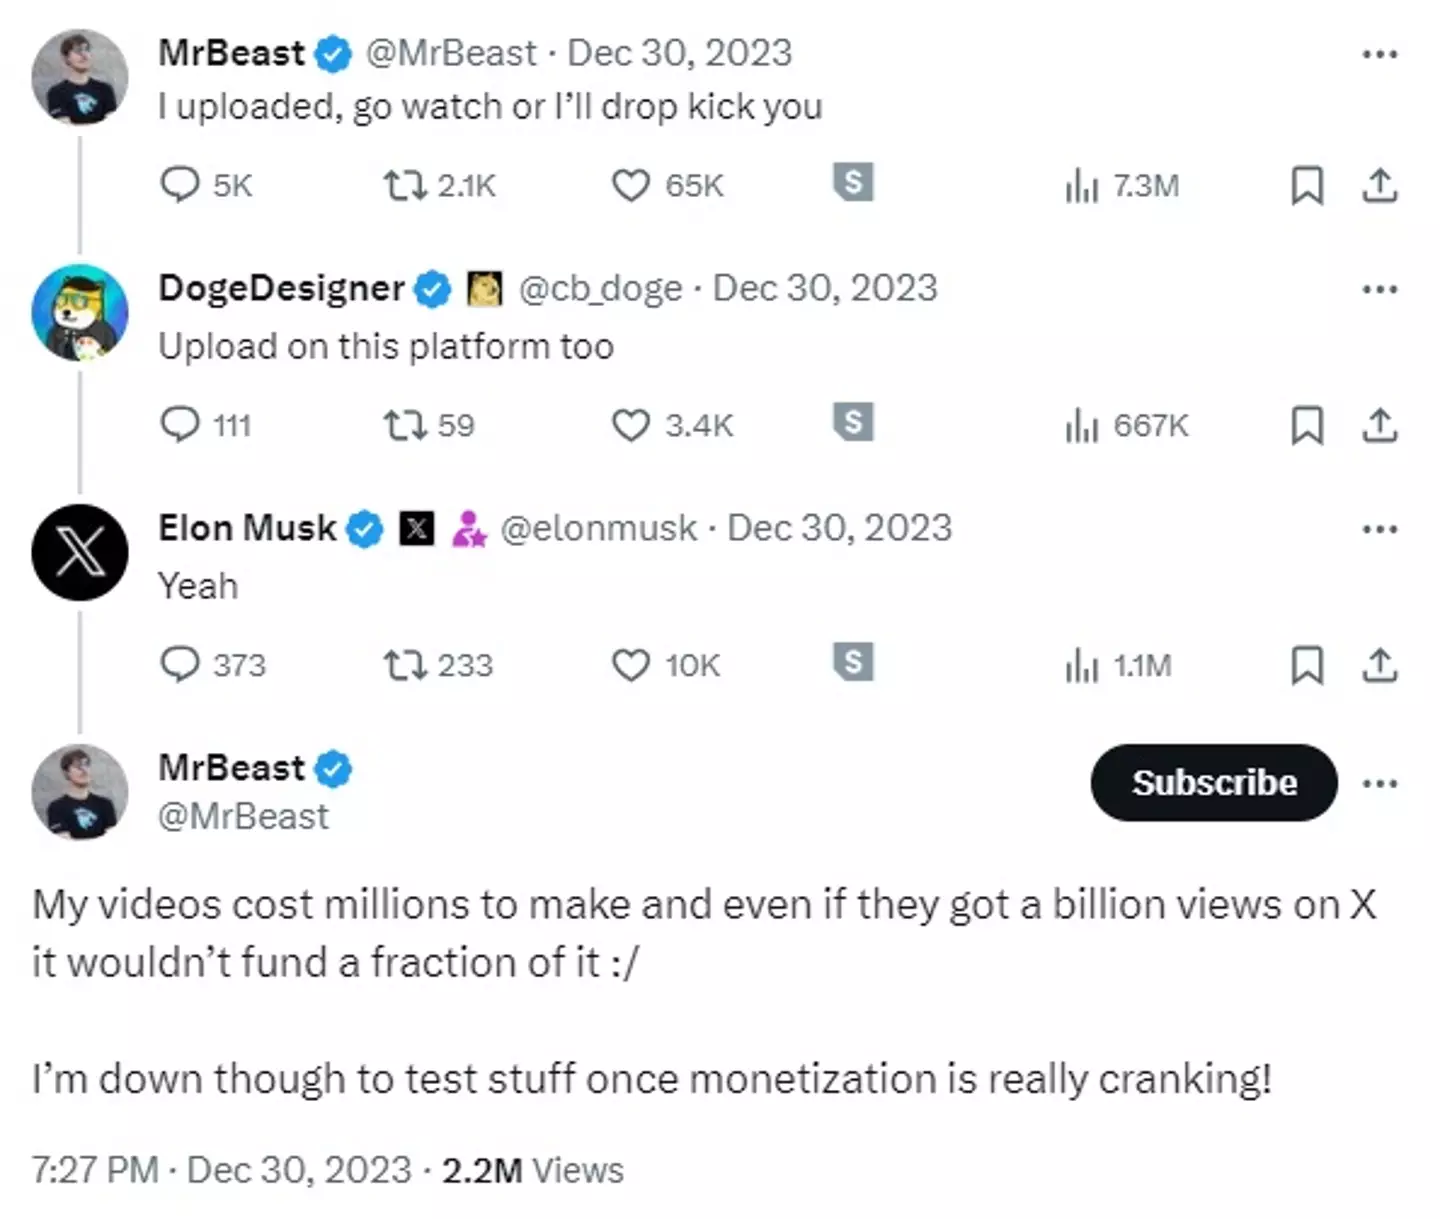 Elon Musk's exchange with MrBeast is going viral on X.